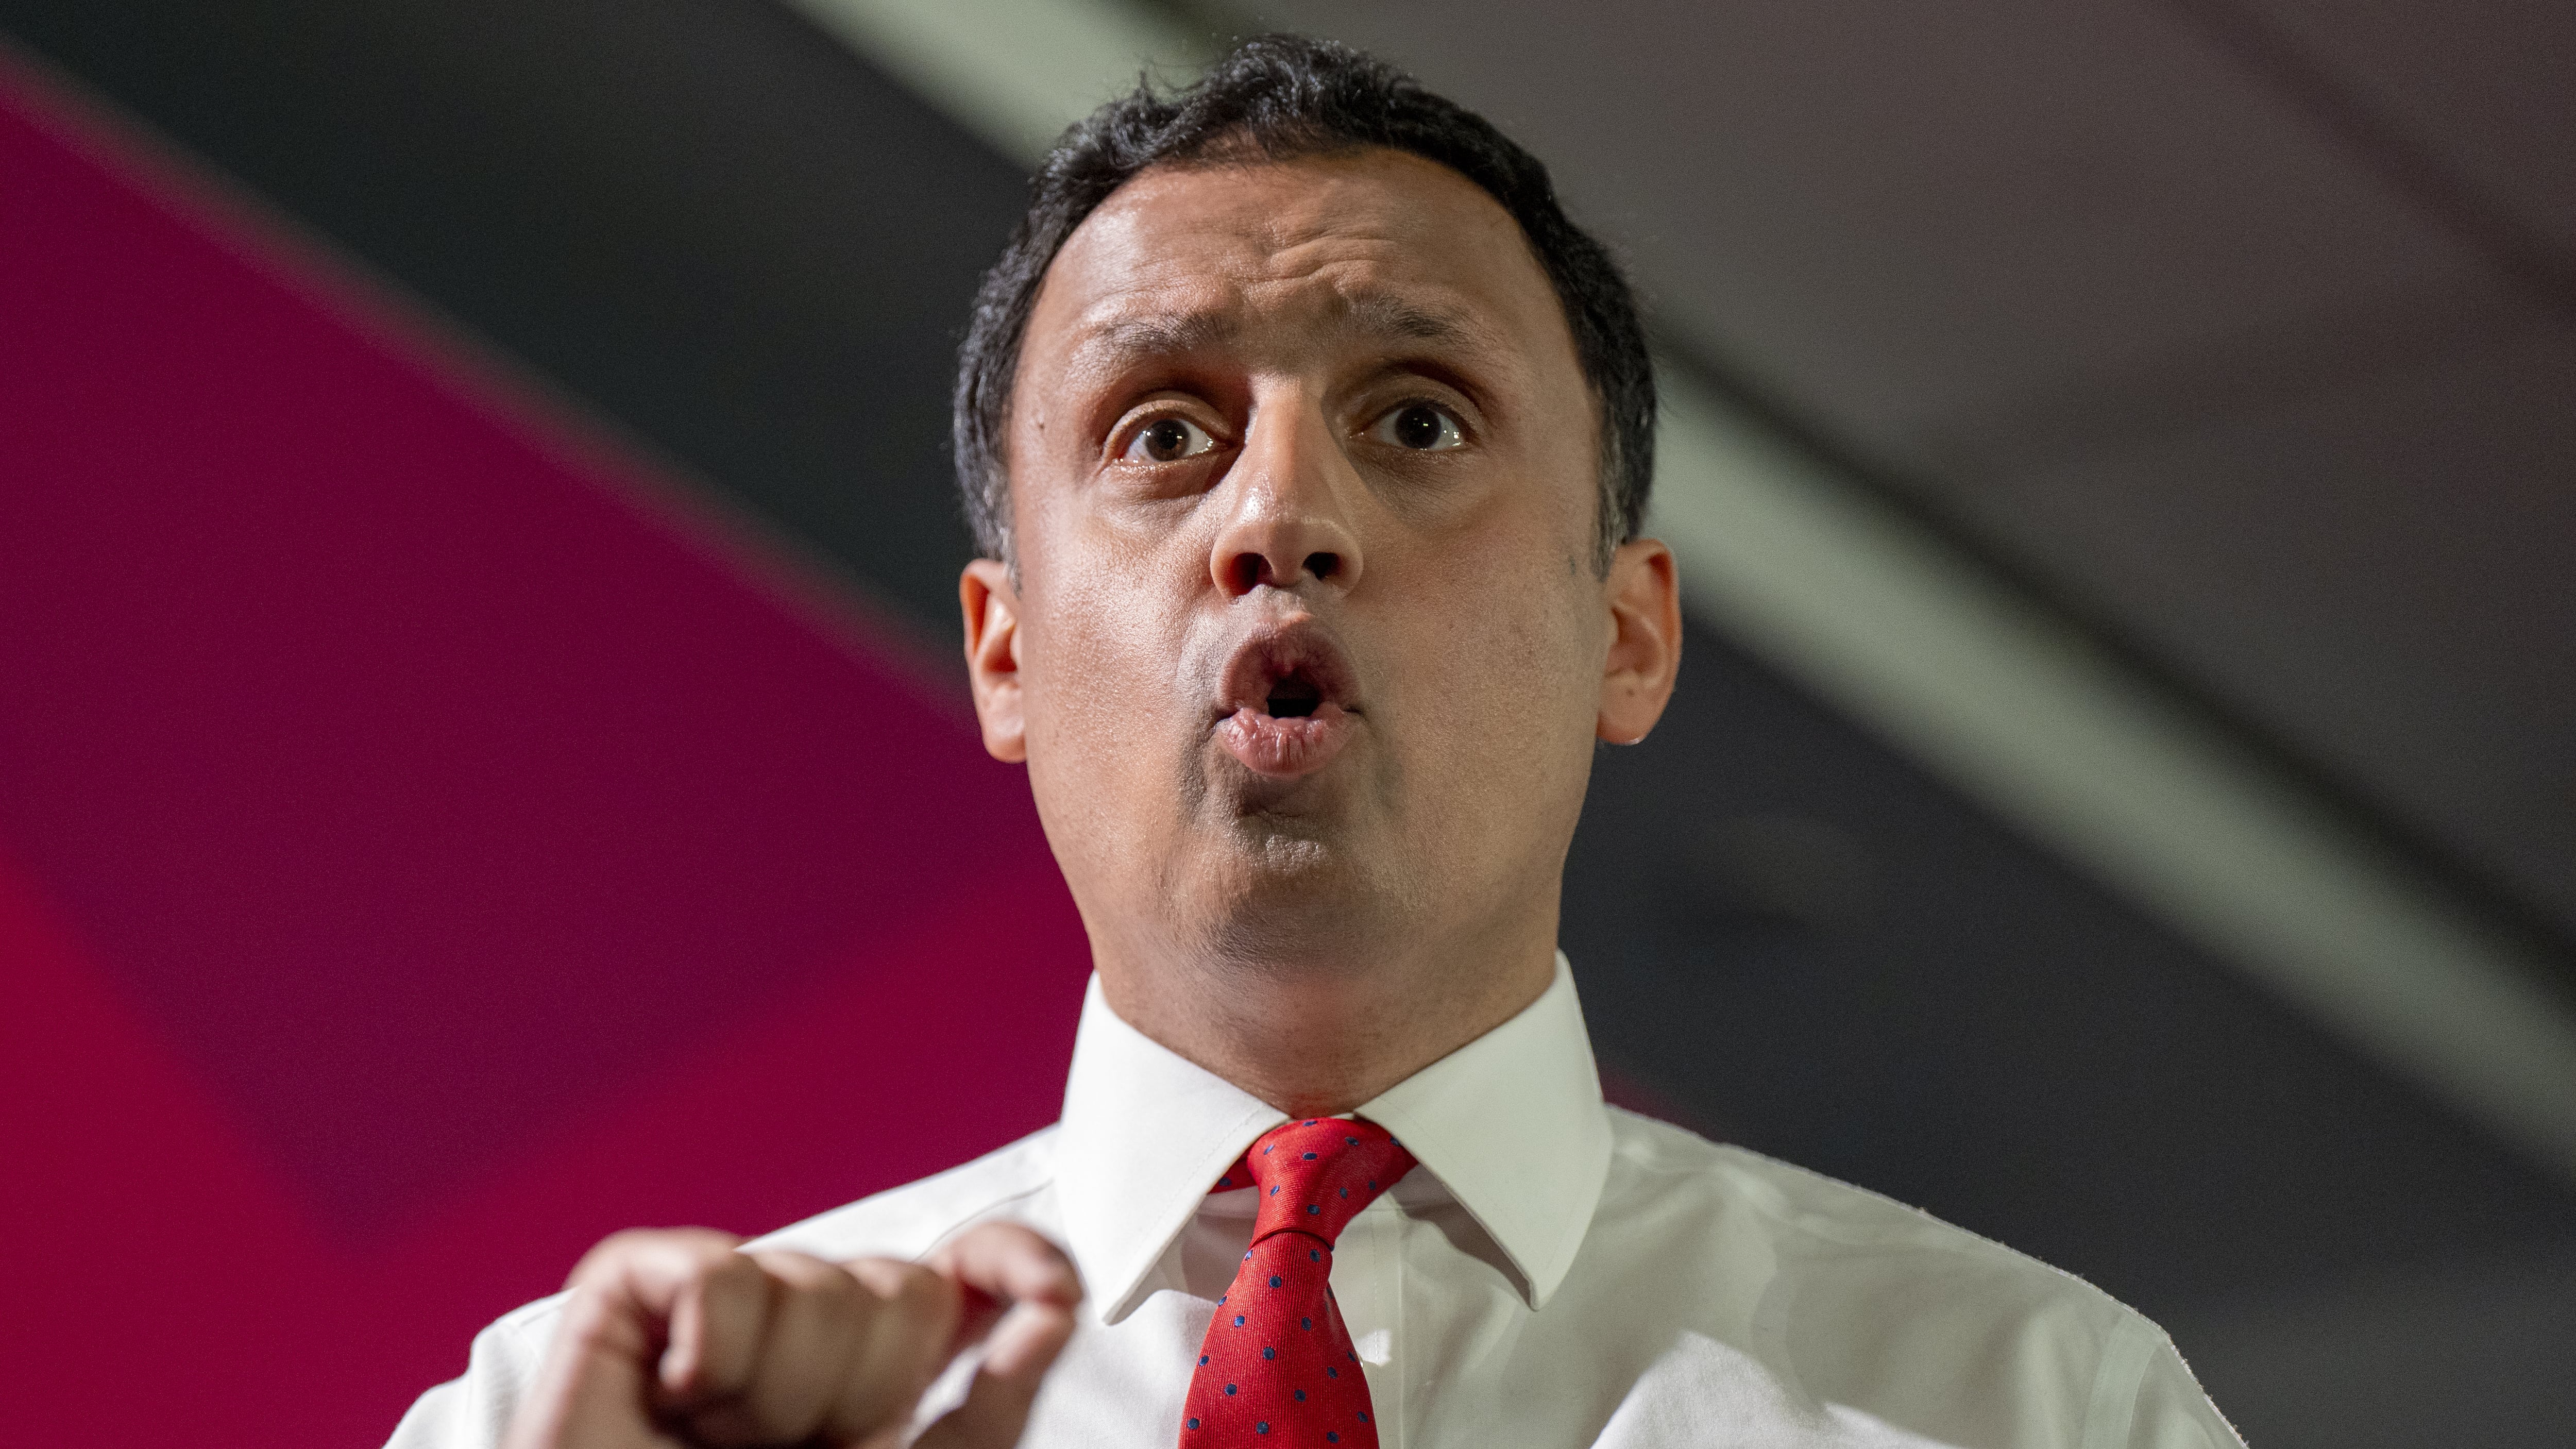 Anas Sarwar said ‘one person disenfranchised is one person too many’